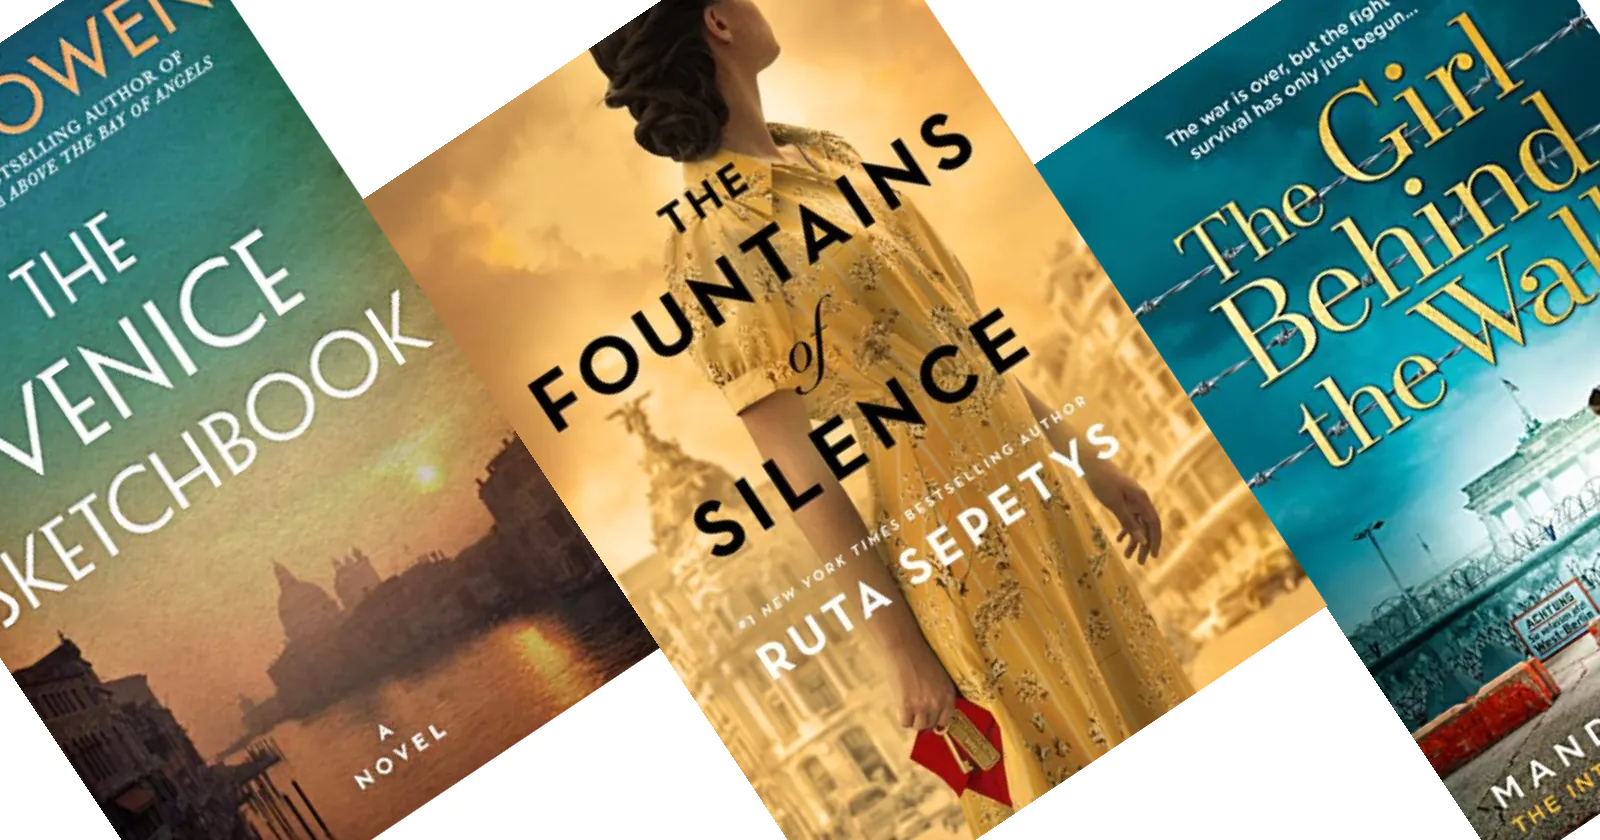 Three tilted book covers with Fountain of Silence in the center